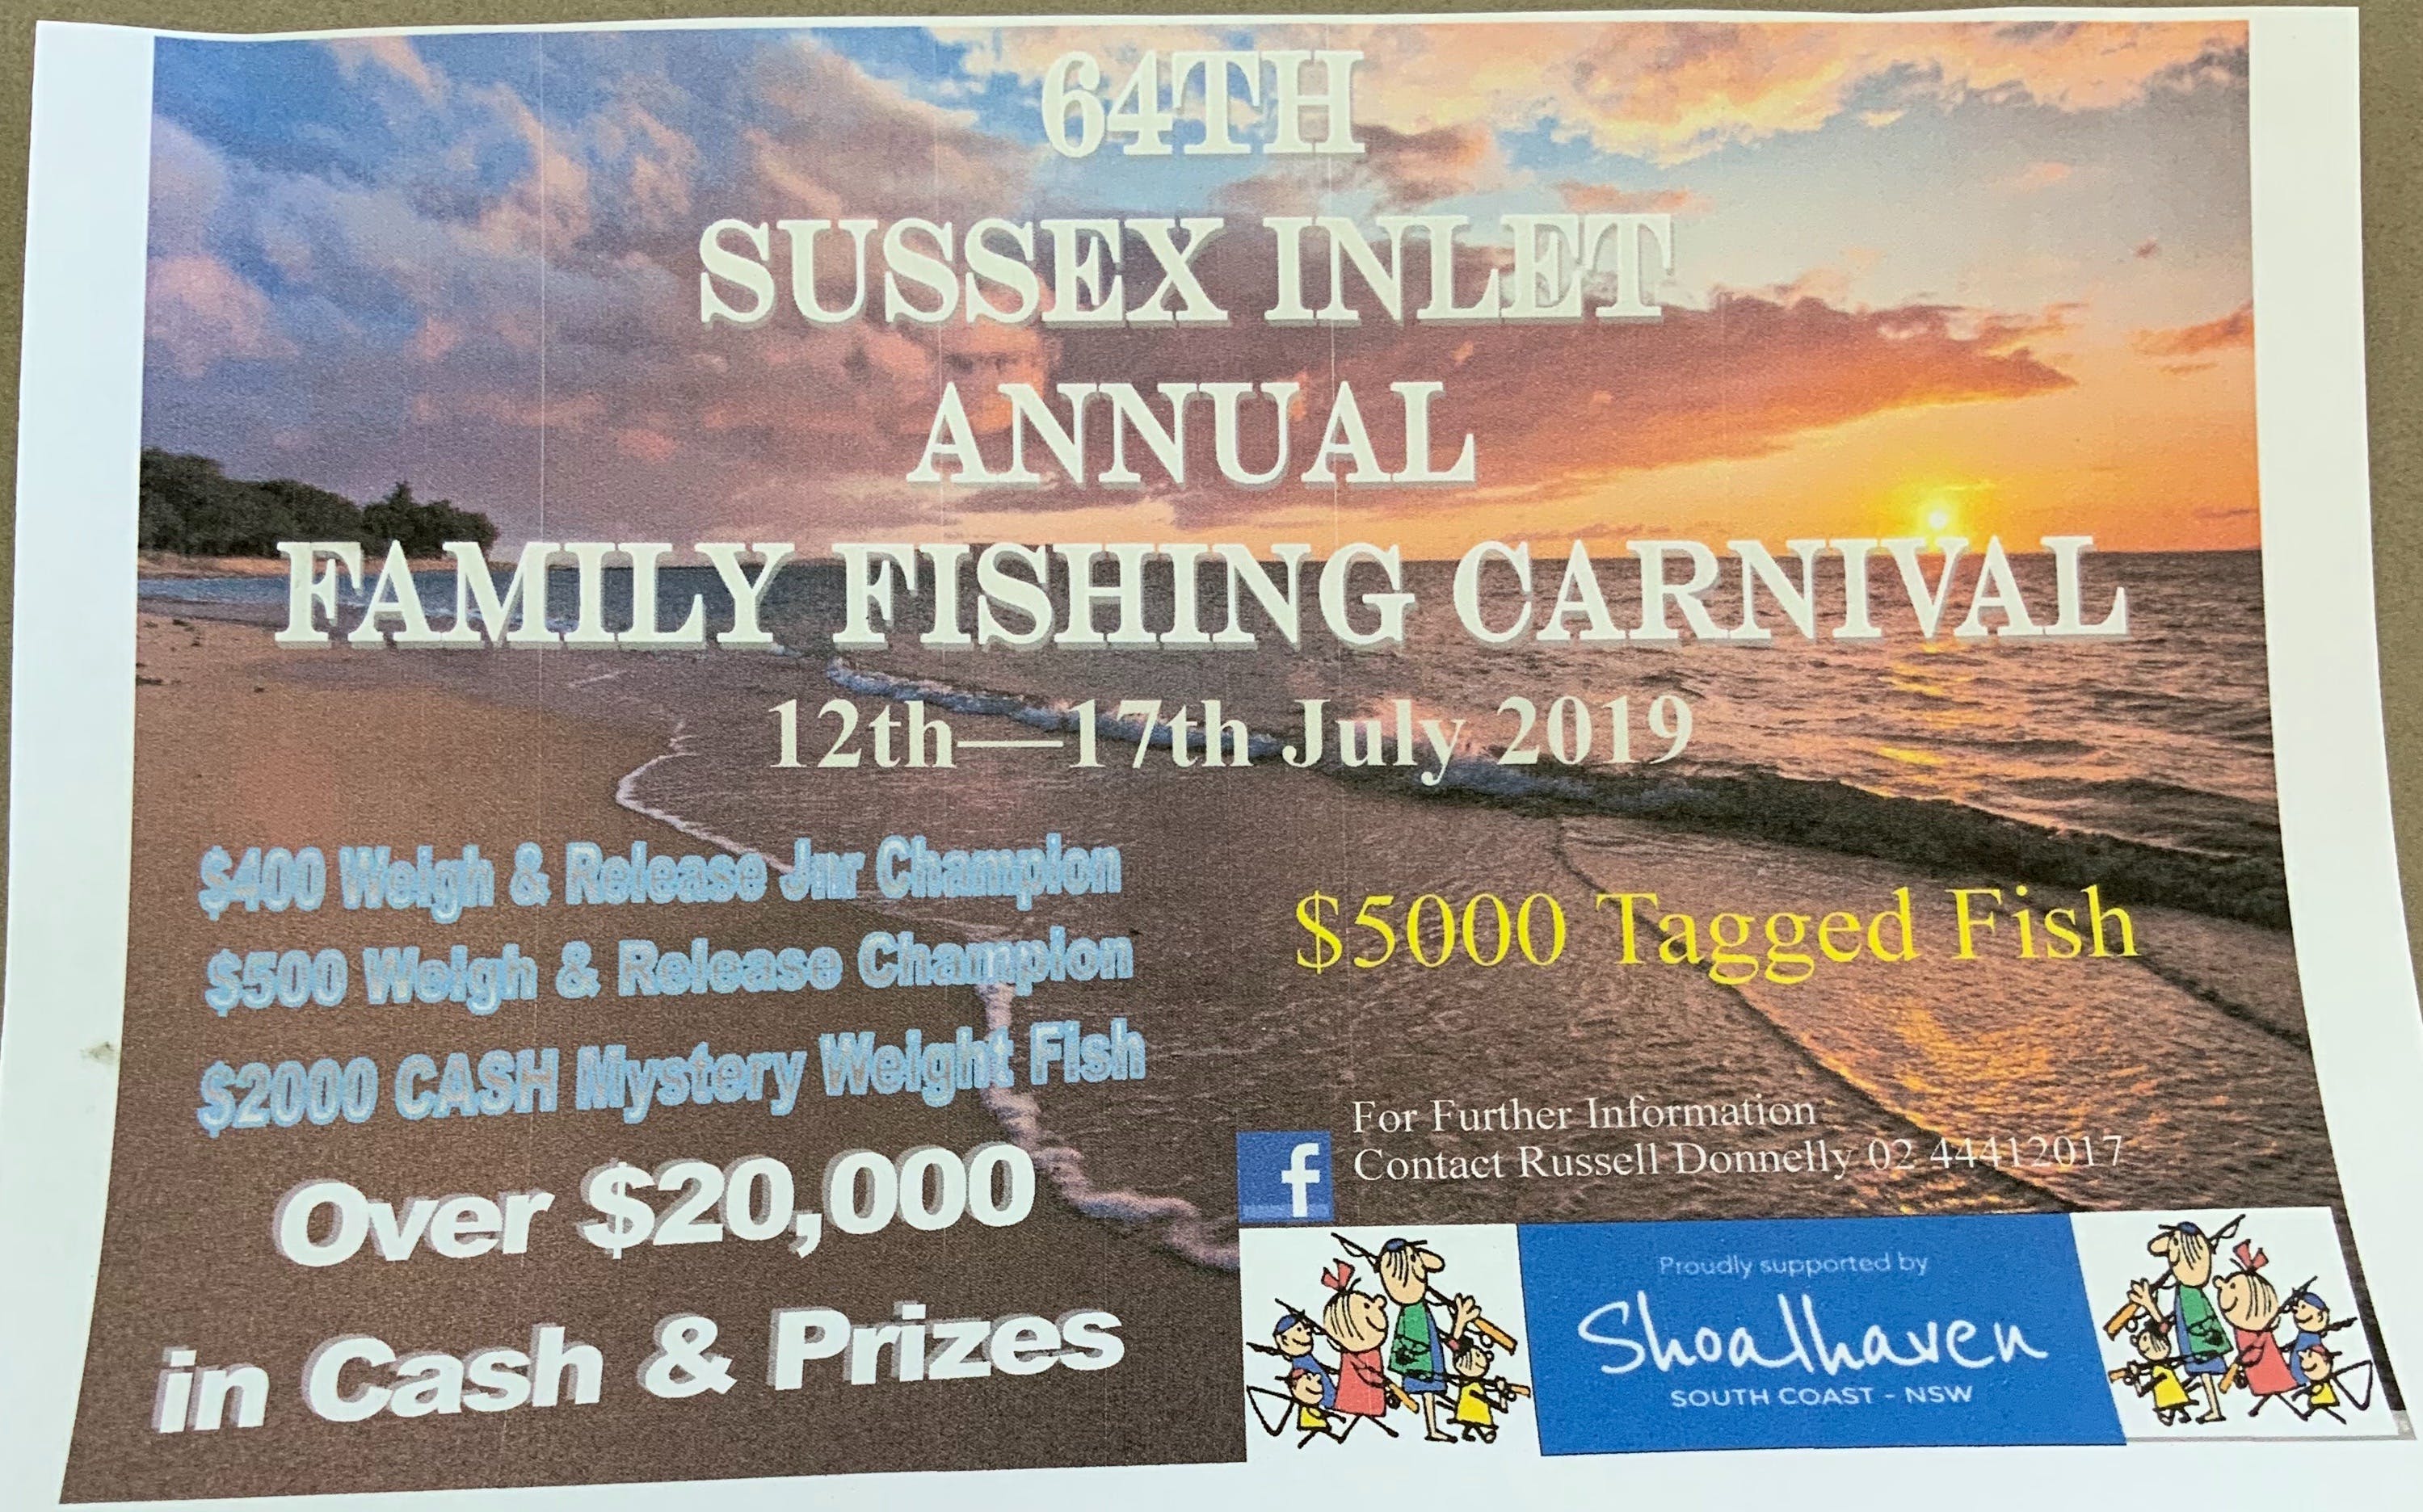 The Sussex Inlet Annual Family Fishing Carnival - Restaurants Sydney